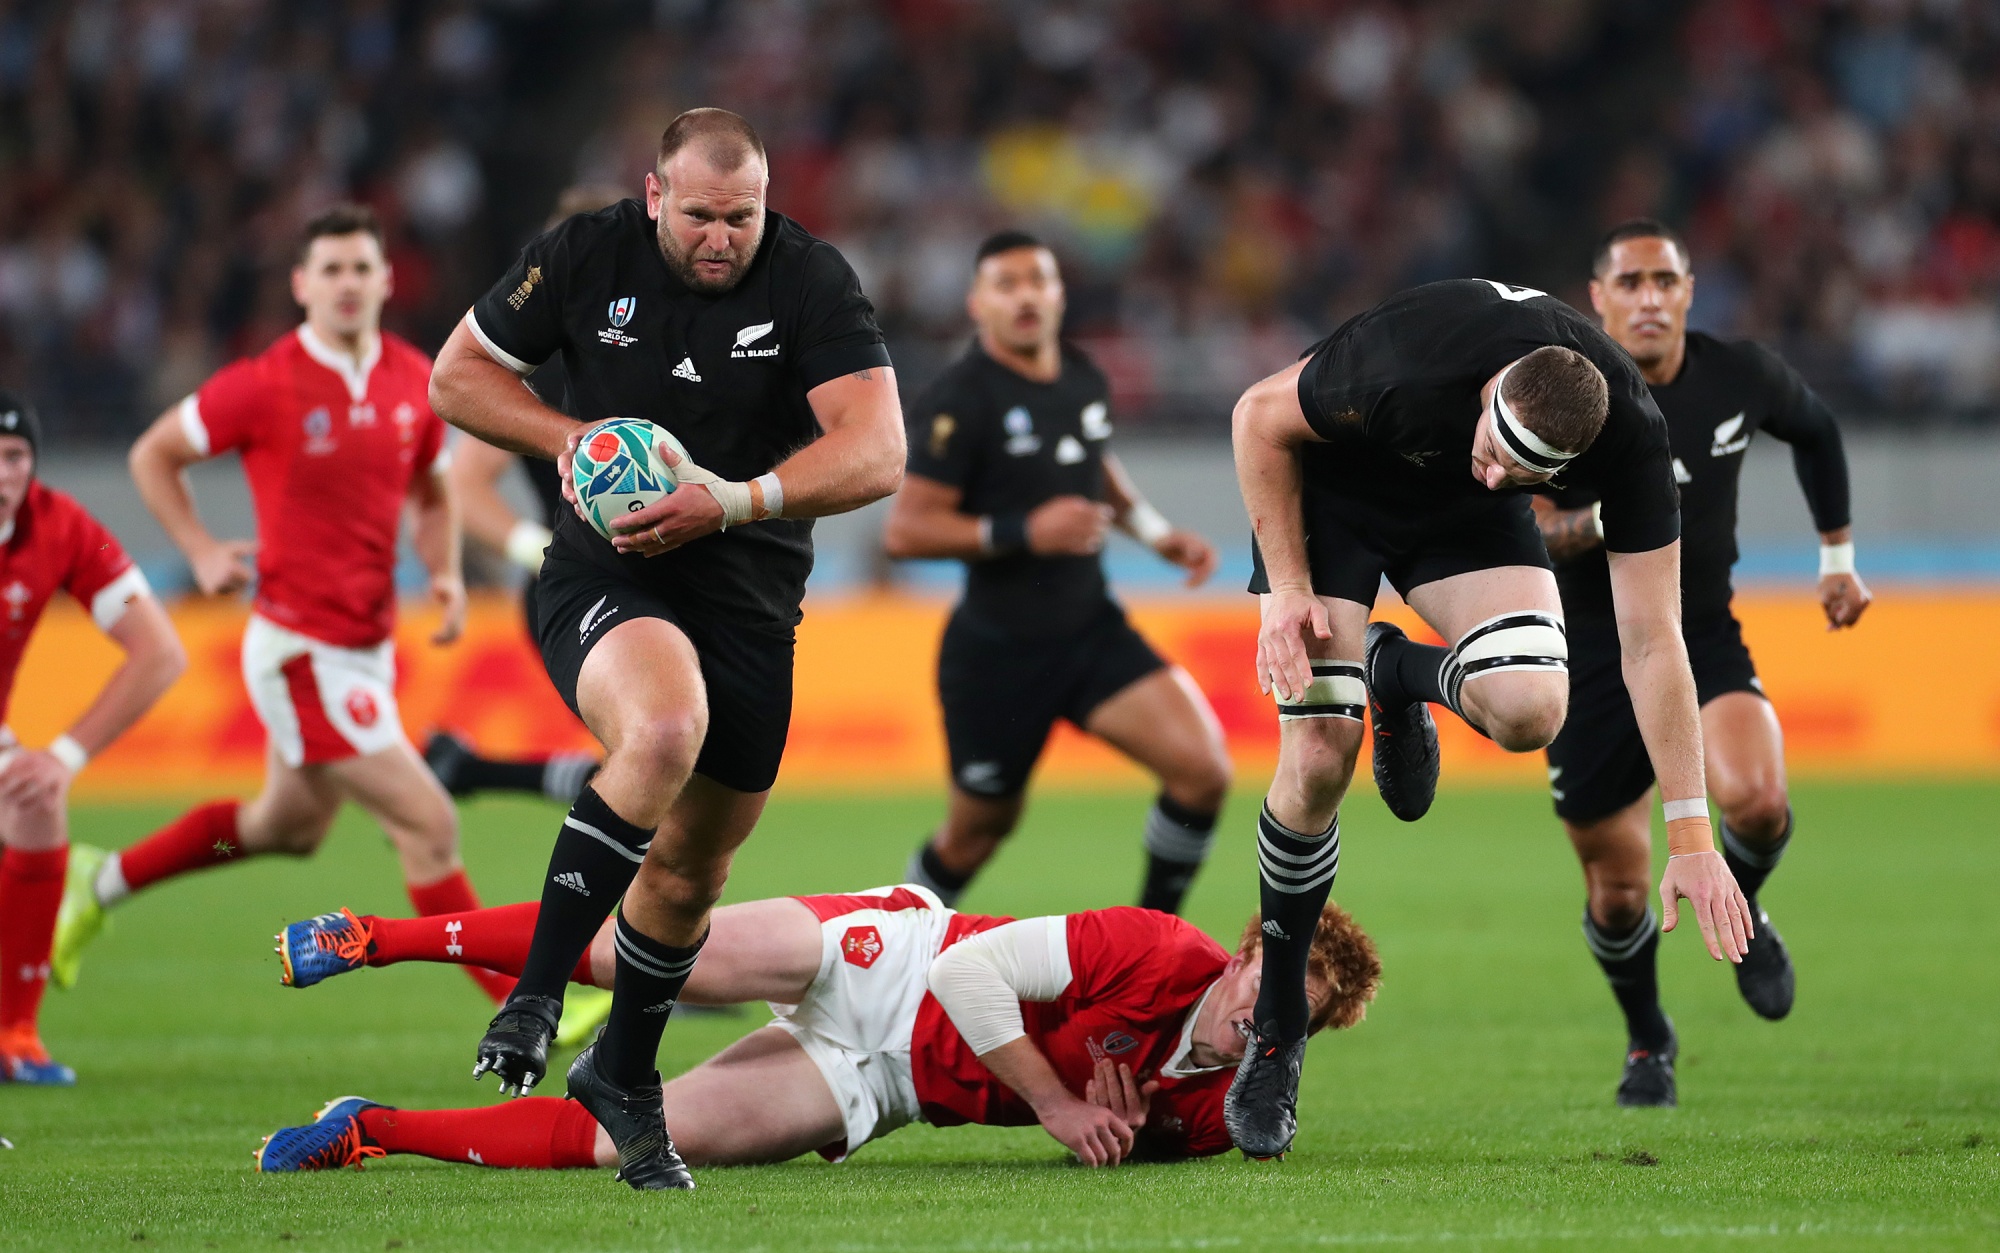 New Zealand’s Joe Moody breaks away to score the opening try during the Rugby World Cup match between New Zealand and Wales in Tokyo in 2019.